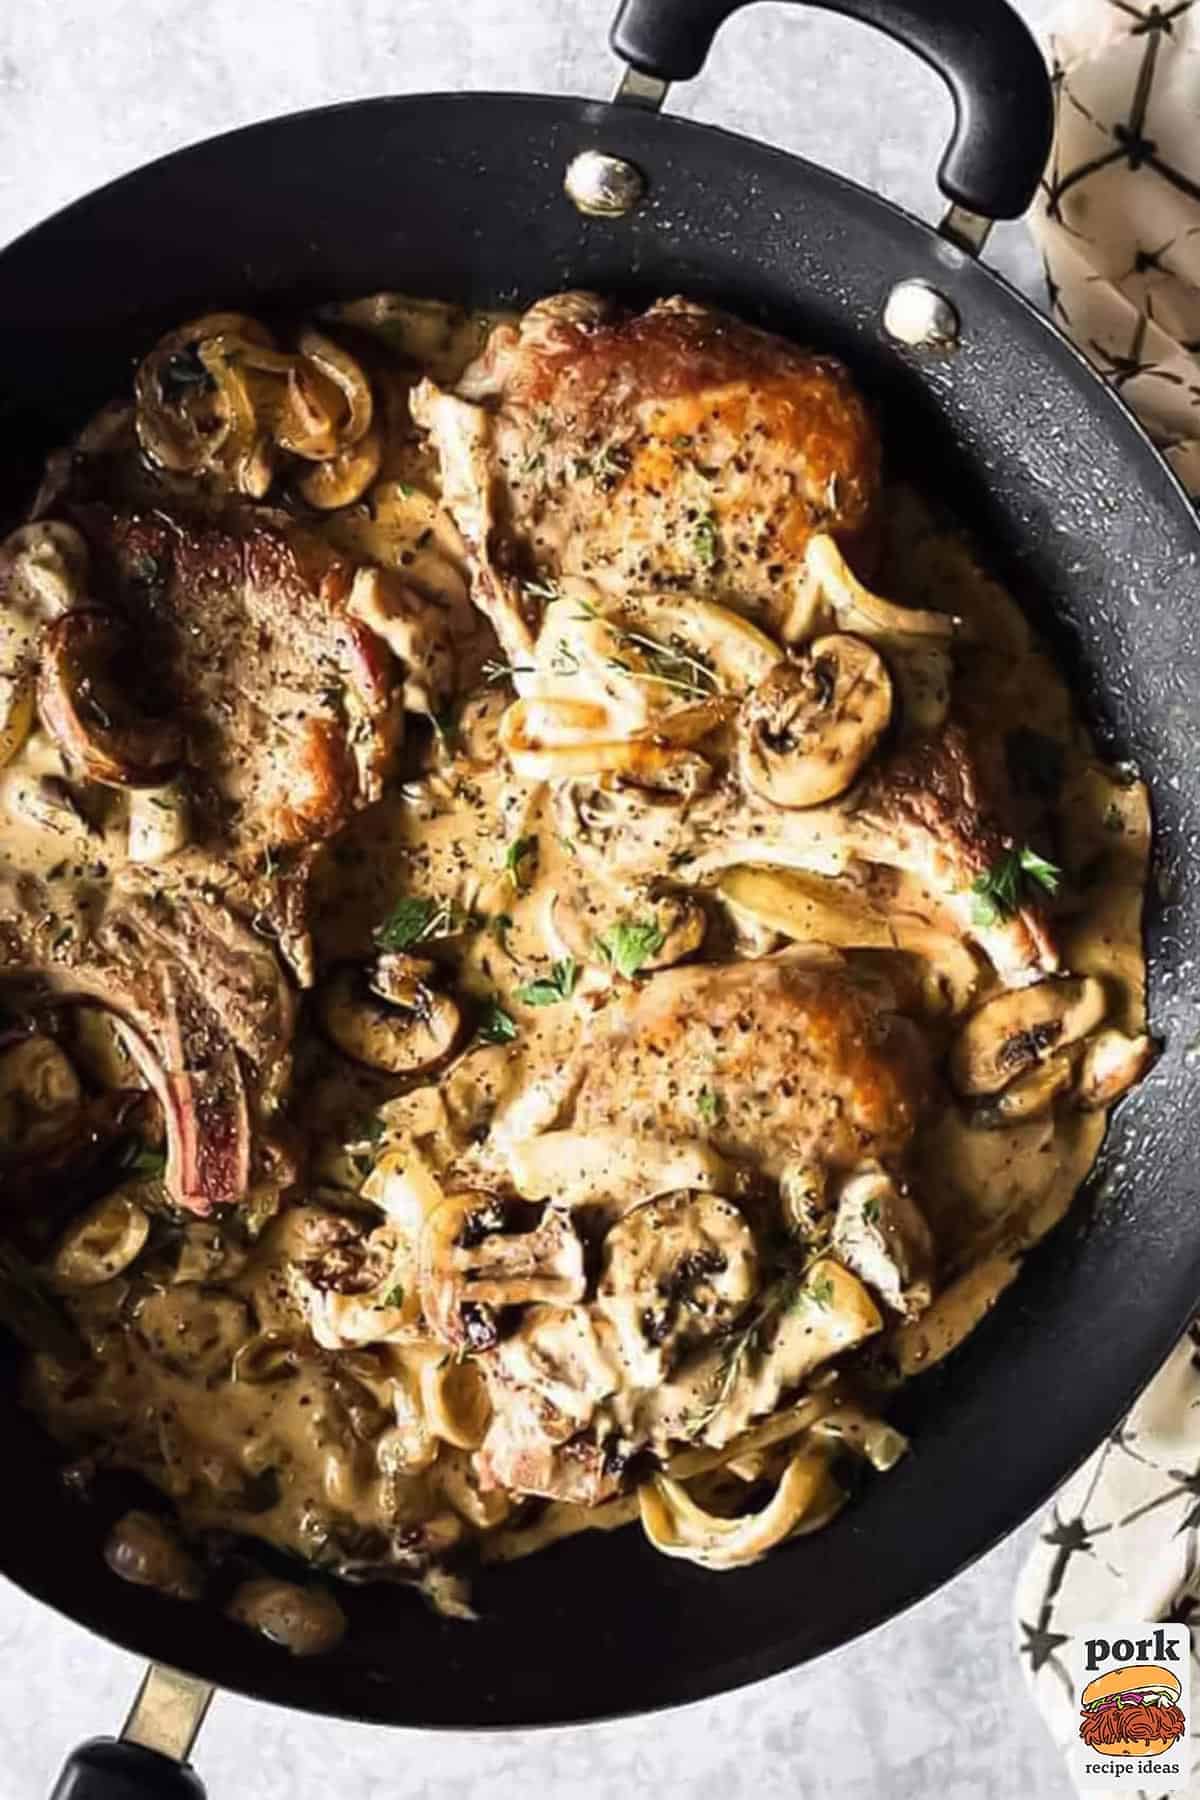 a pan filled with pan fried pork chops and mushroom gravy